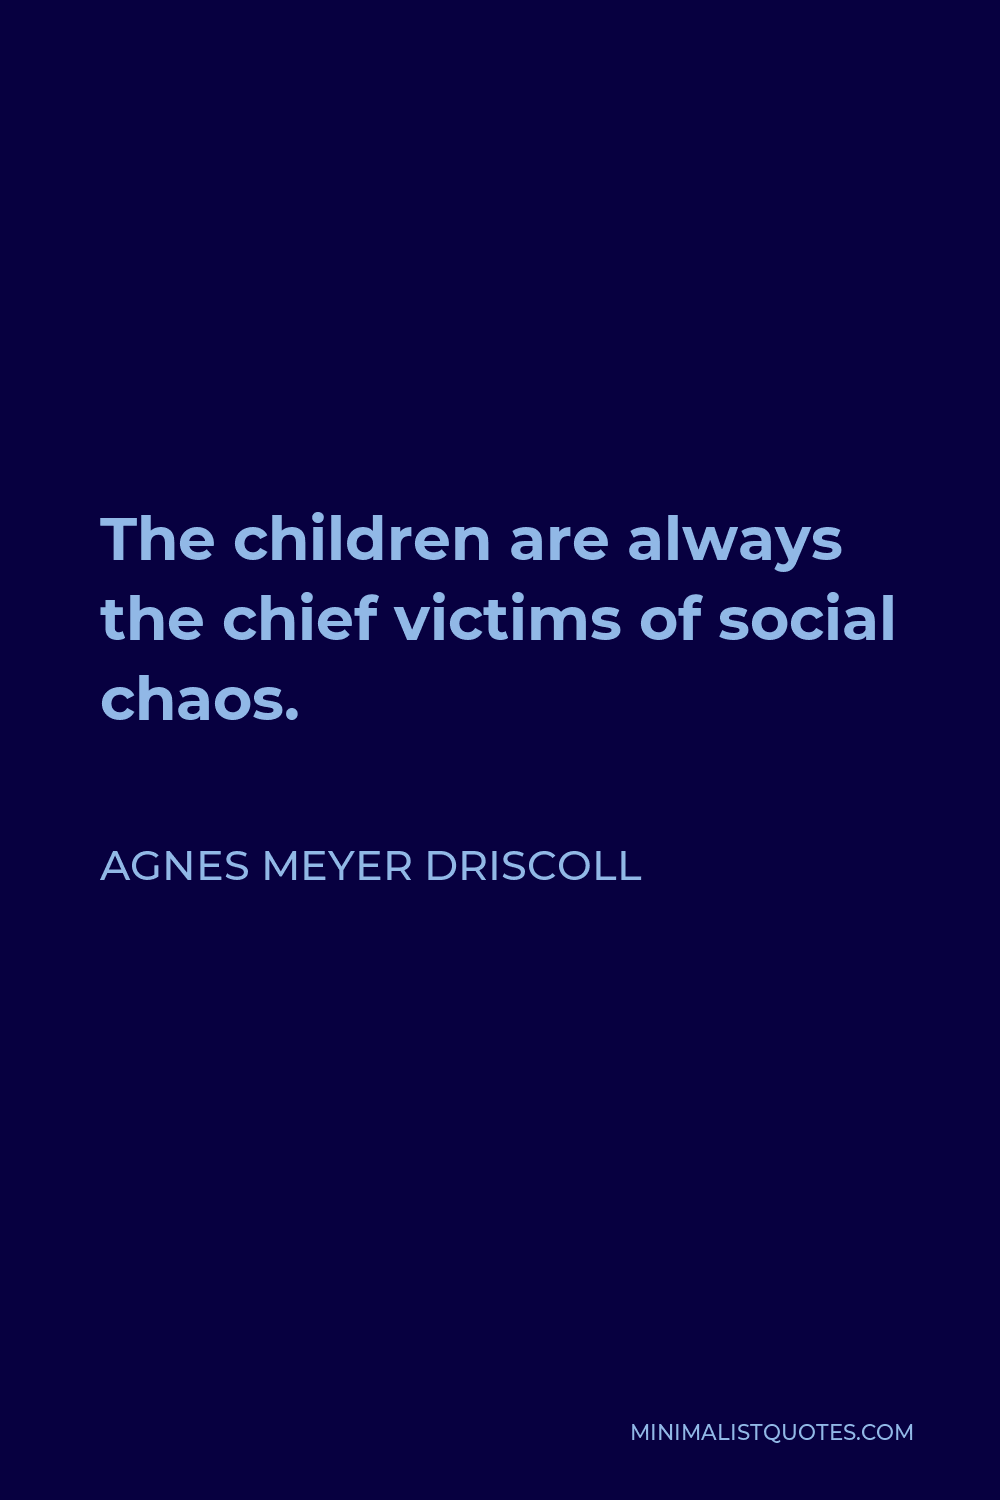 Agnes Meyer Driscoll Quote - The children are always the chief victims of social chaos.